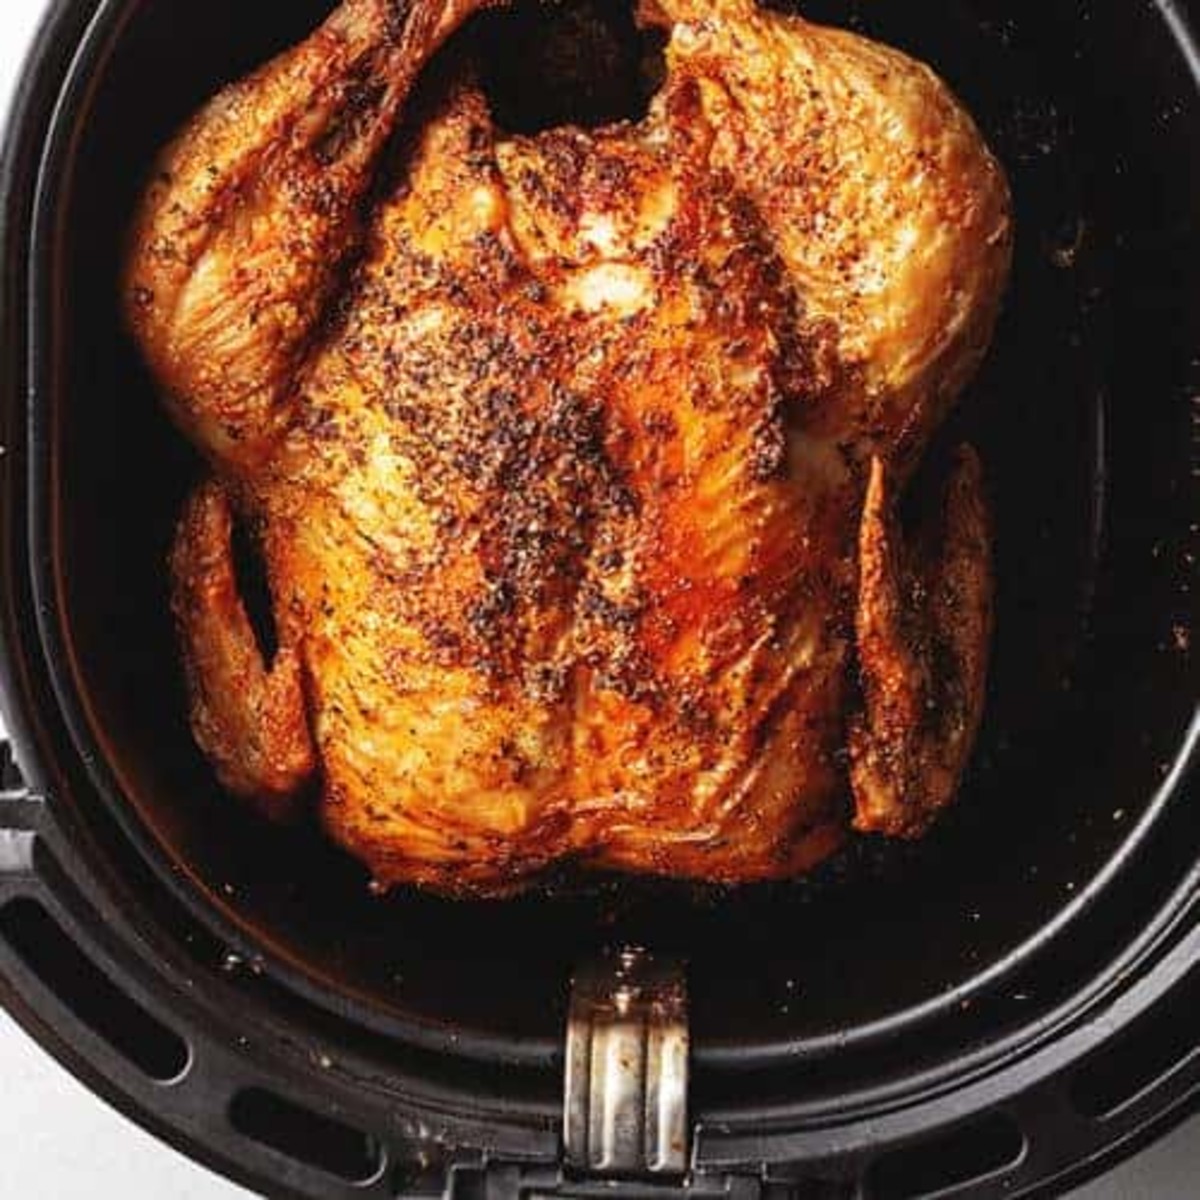 15 Foods You Didn't Know You Can Cook in an Air Fryer